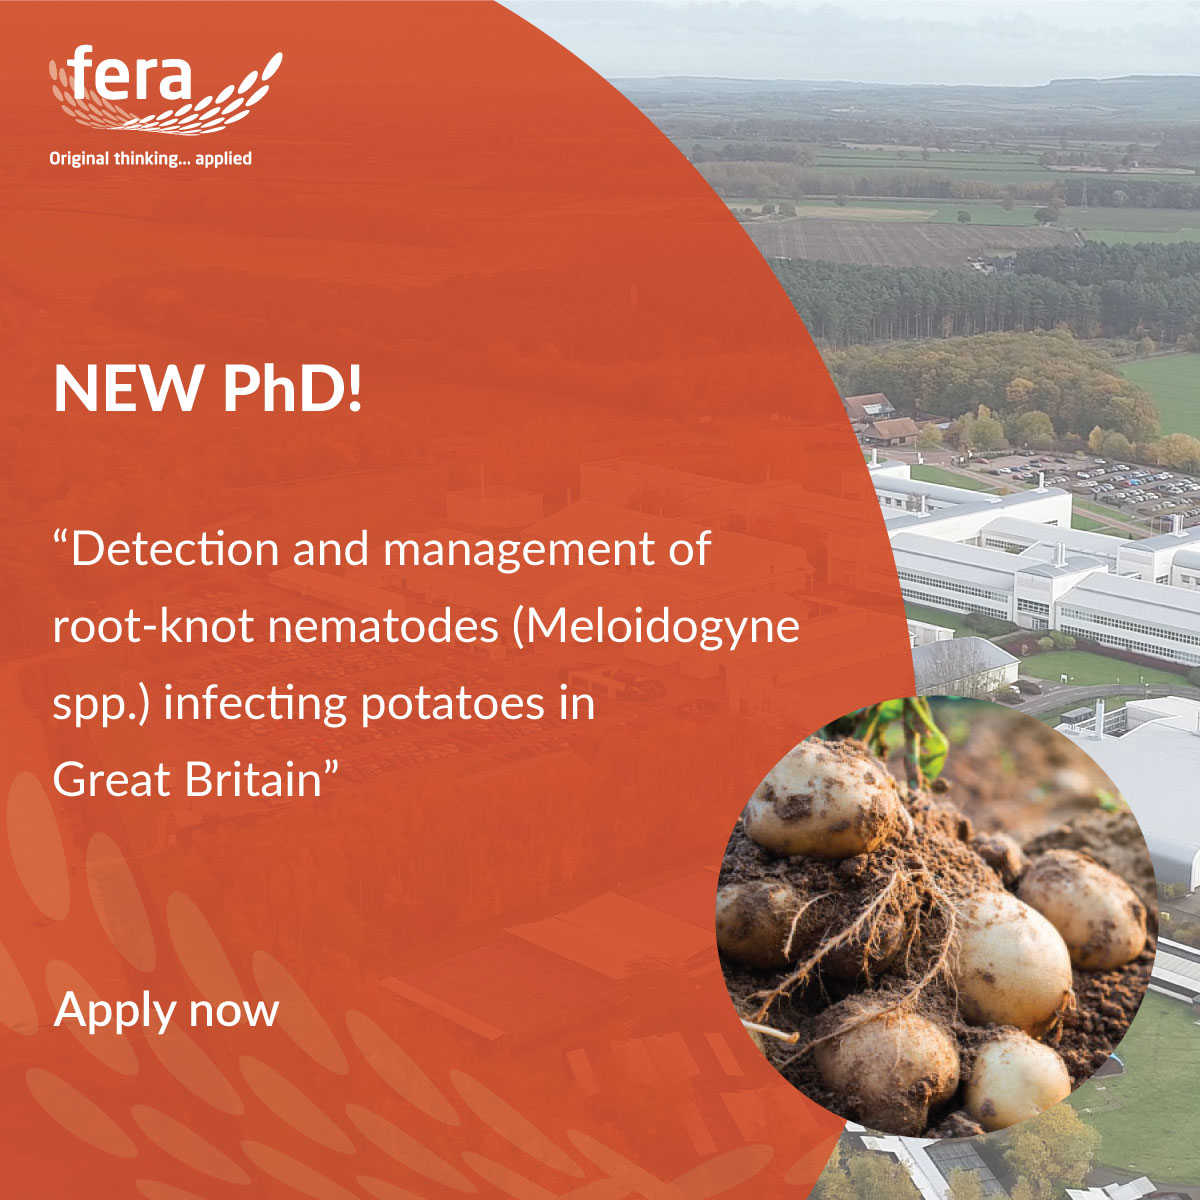 Fera Science, is proud to announce we have another new exciting #PhD opportunity in partnership with Harper Adams University! 🥔If you, or know someone who is interested in the PhD below, click here for more information > hubs.ly/Q02snV180 #careers #research